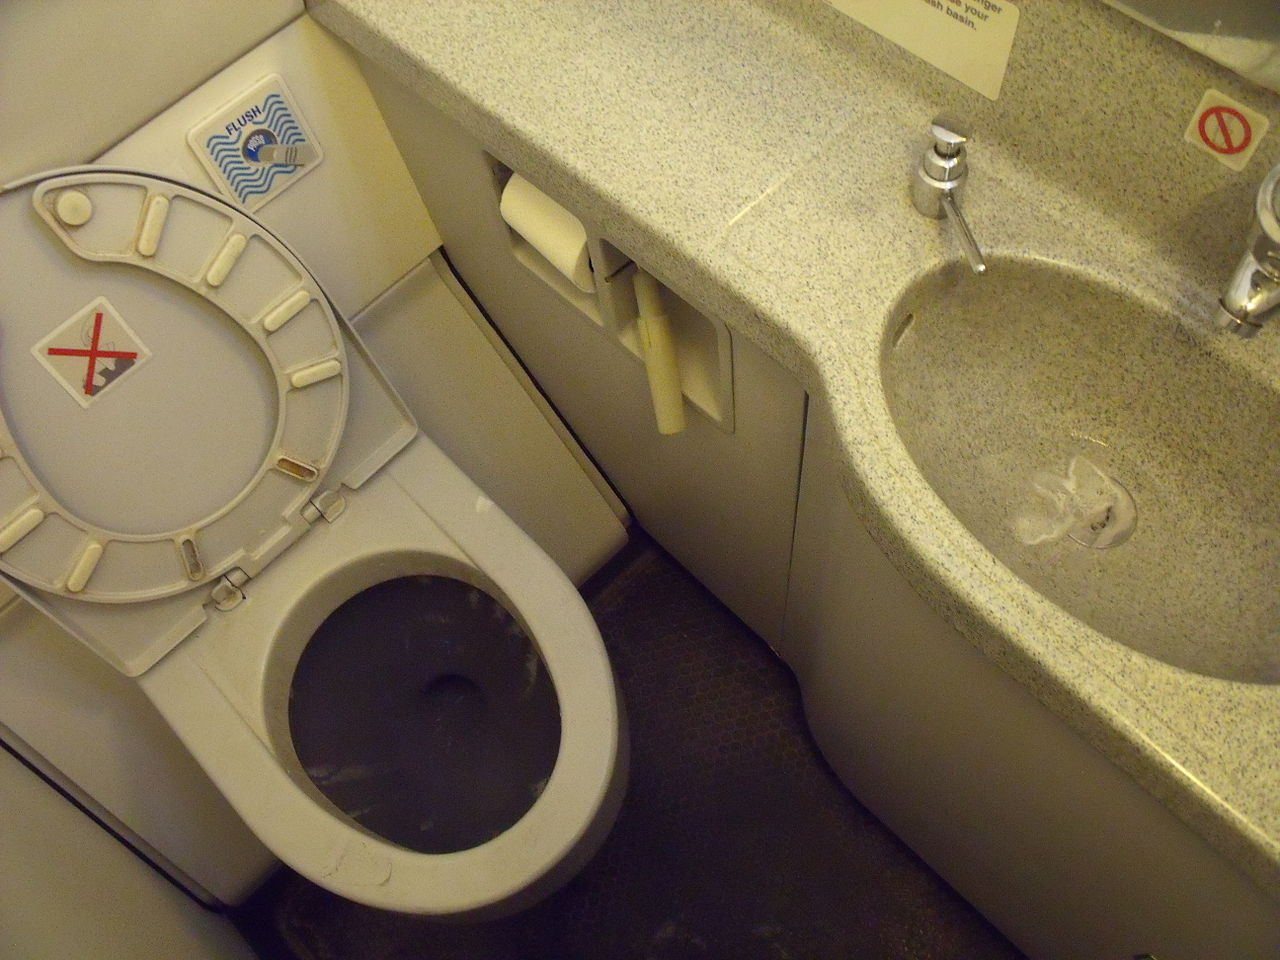 Experts think an aeroplane toilet may suffered a leak and allowed the human waste to escape and freeze as it fell to earth